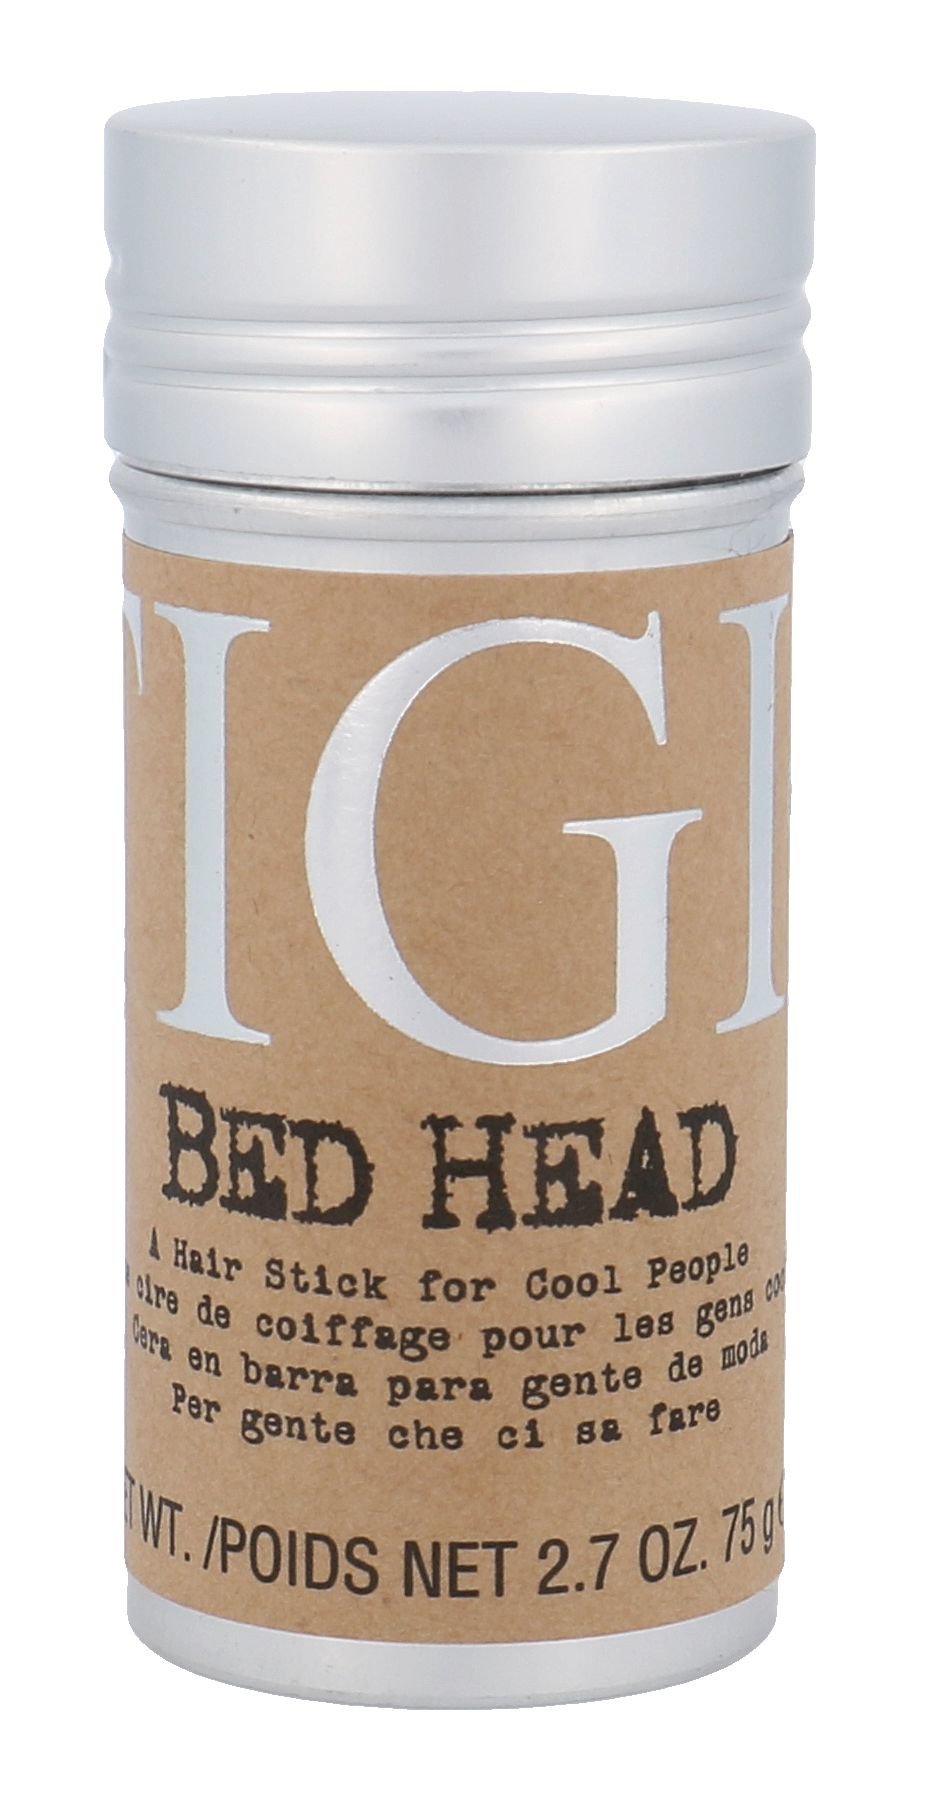 Tigi Bed Head Hair Stick For Cool People